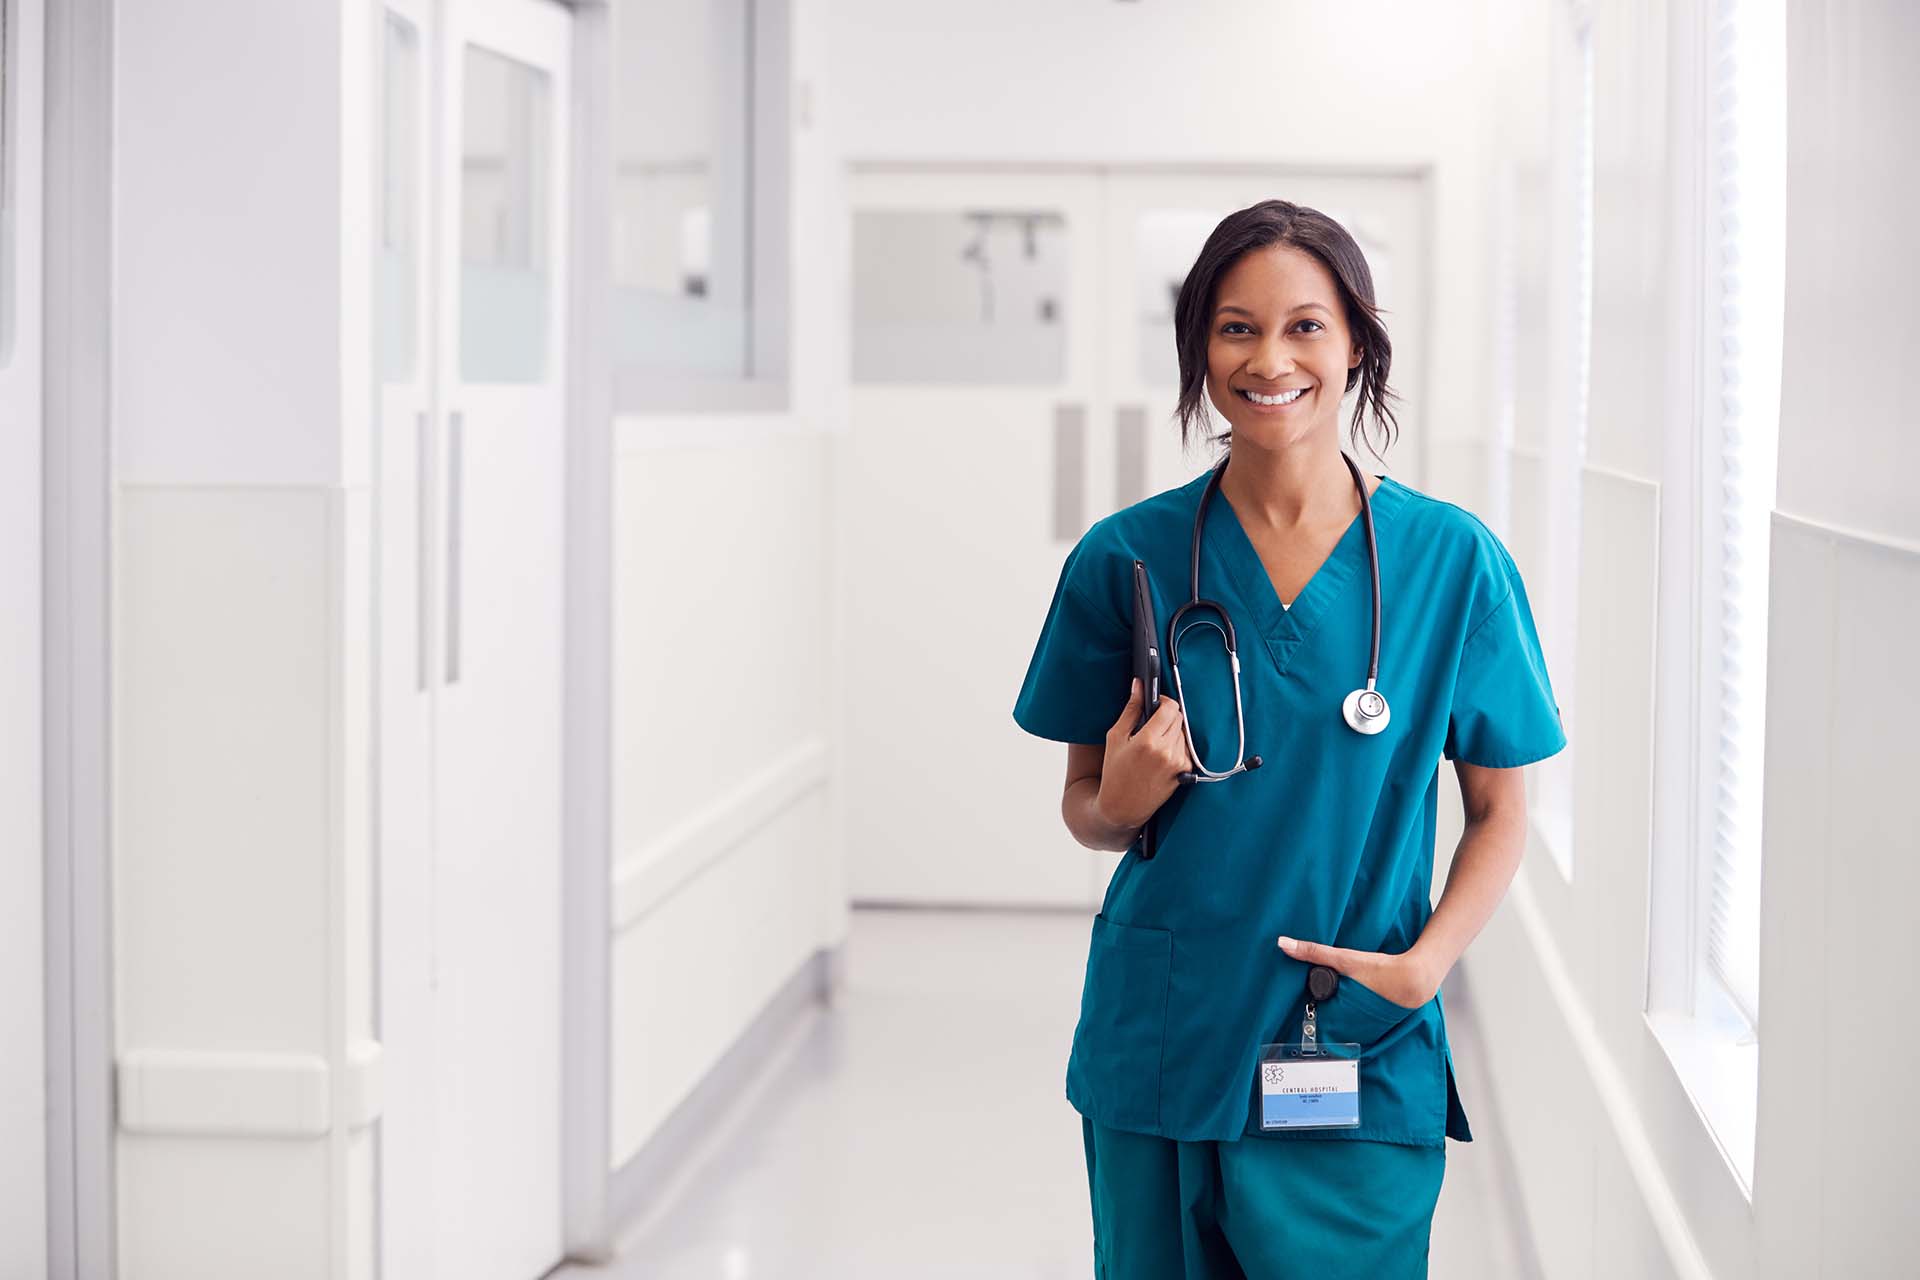 A woman in blue hospital gown with stethoscope